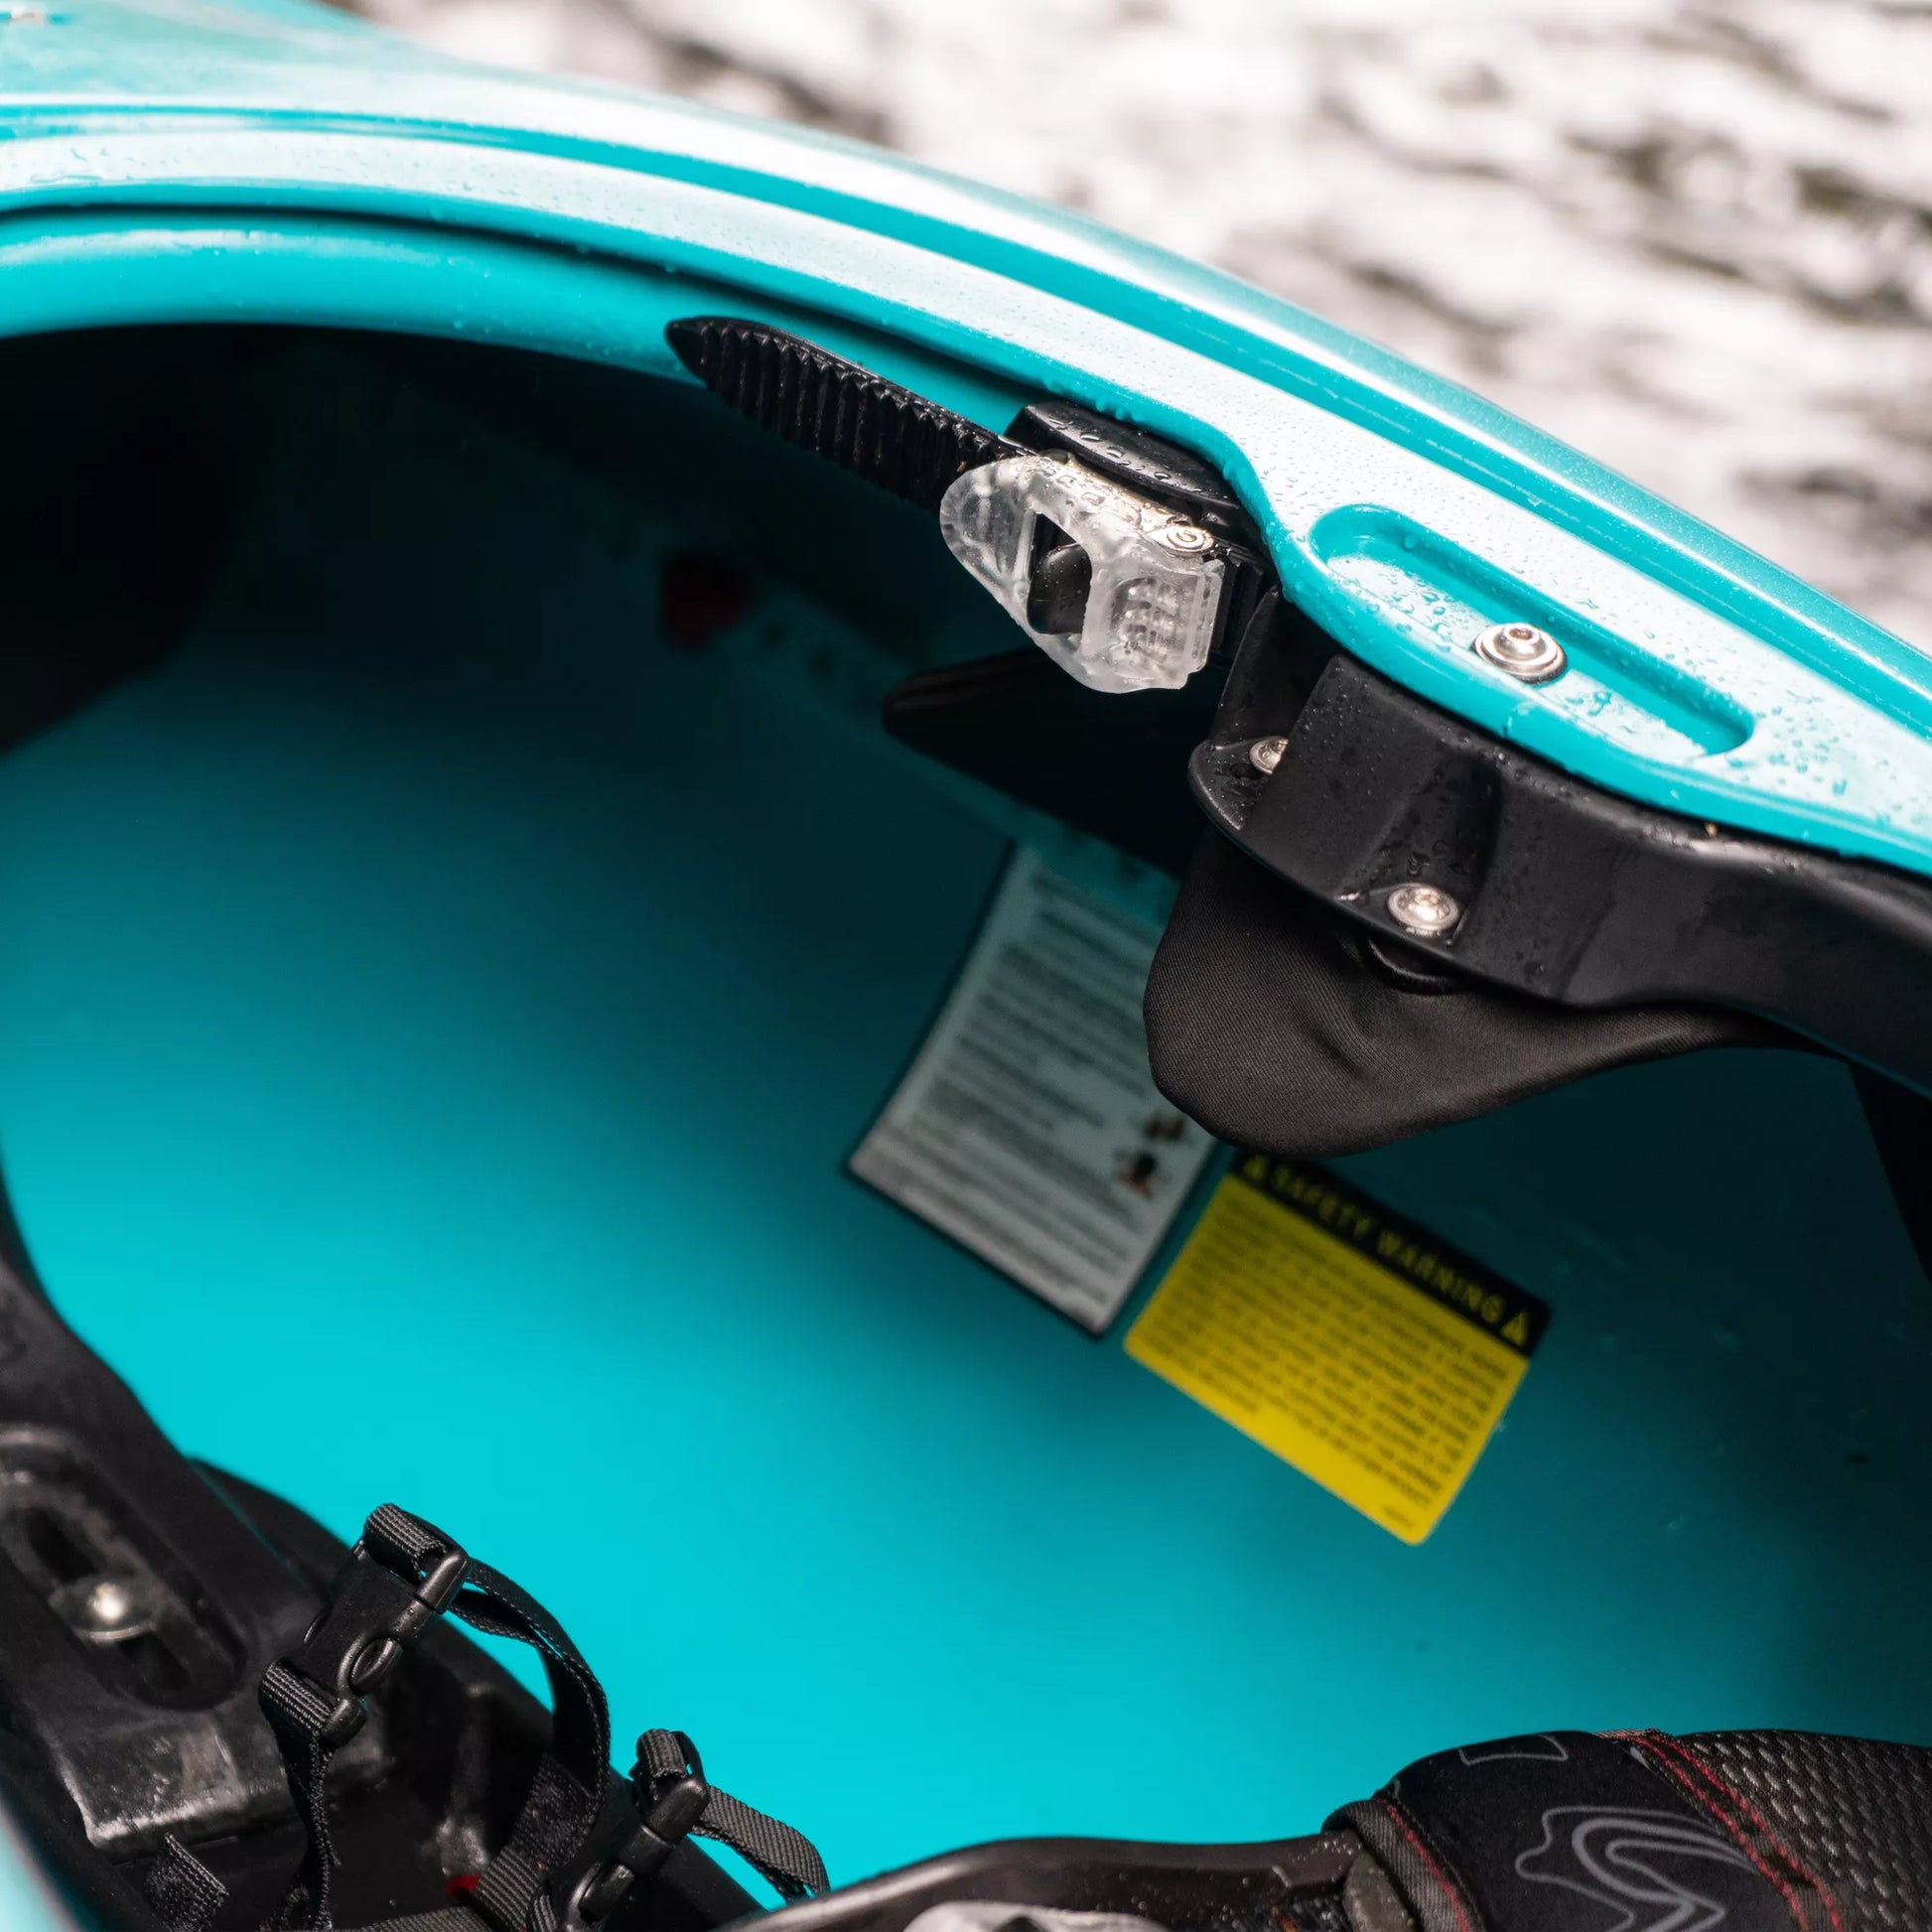 Close-up of the Dagger Code Whitewater Kayak cockpit with Contour Ergo Creek outfitting, safety equipment, and a personal flotation device inside, ready for a whitewater paddler.